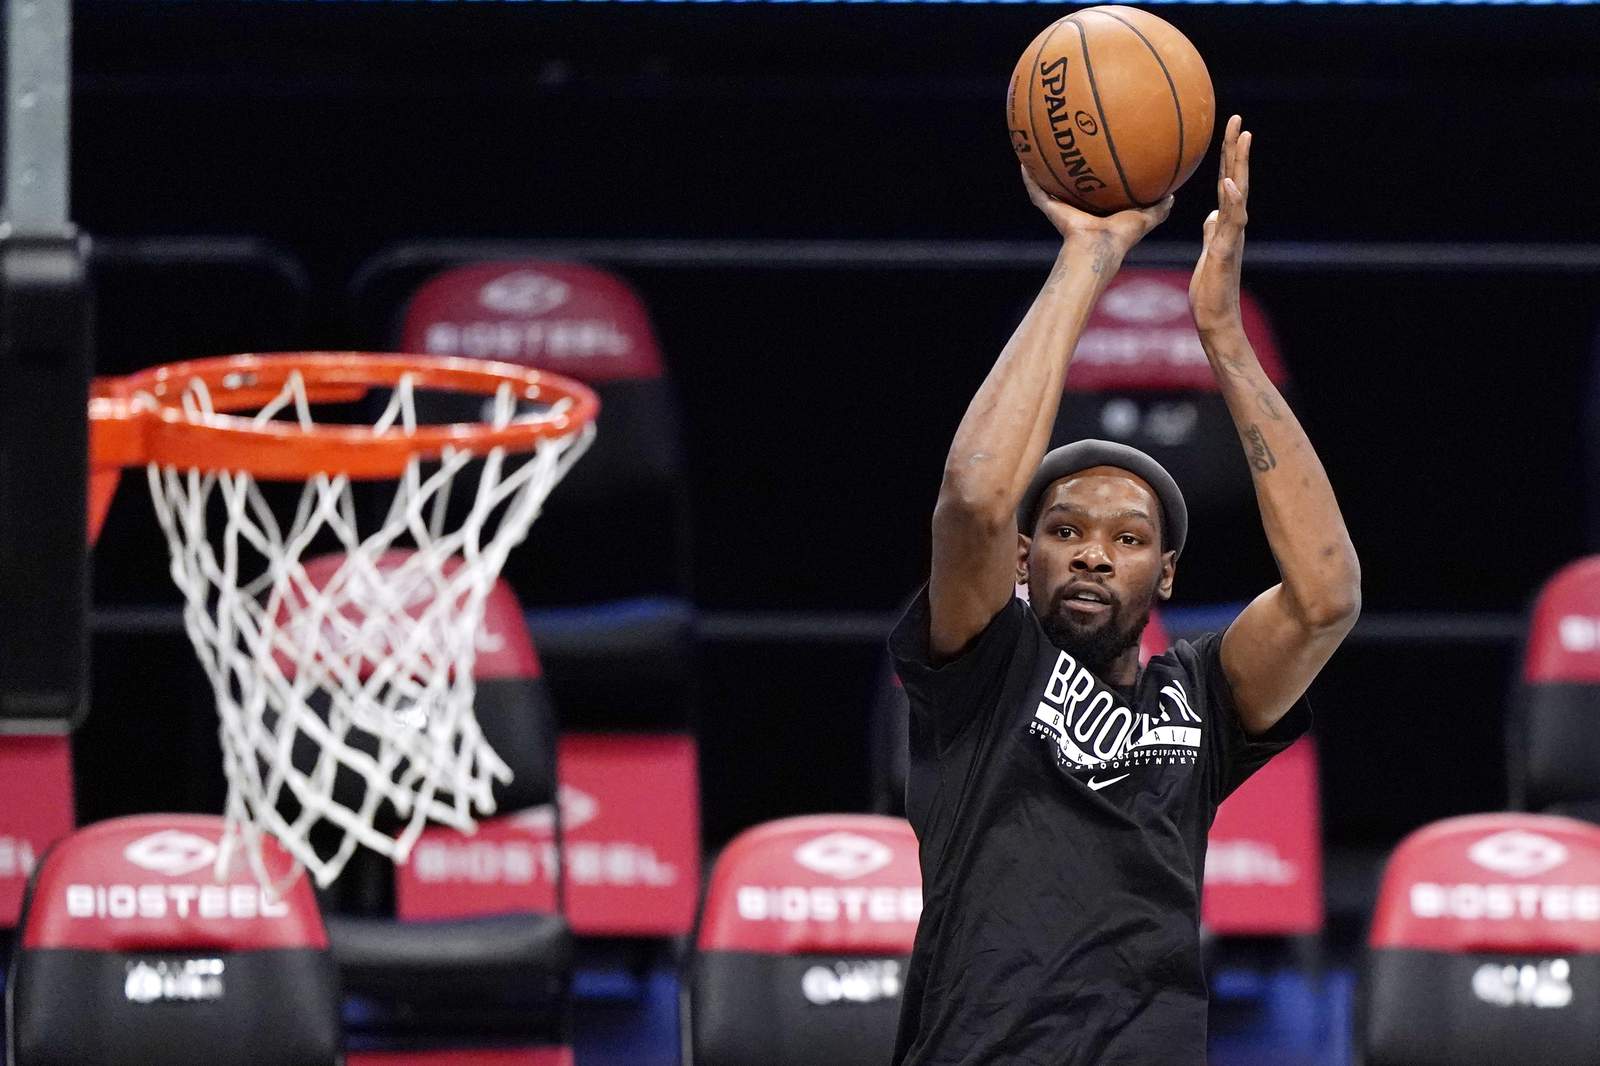 Net gains: High hopes in Brooklyn with Durant, Irving ready